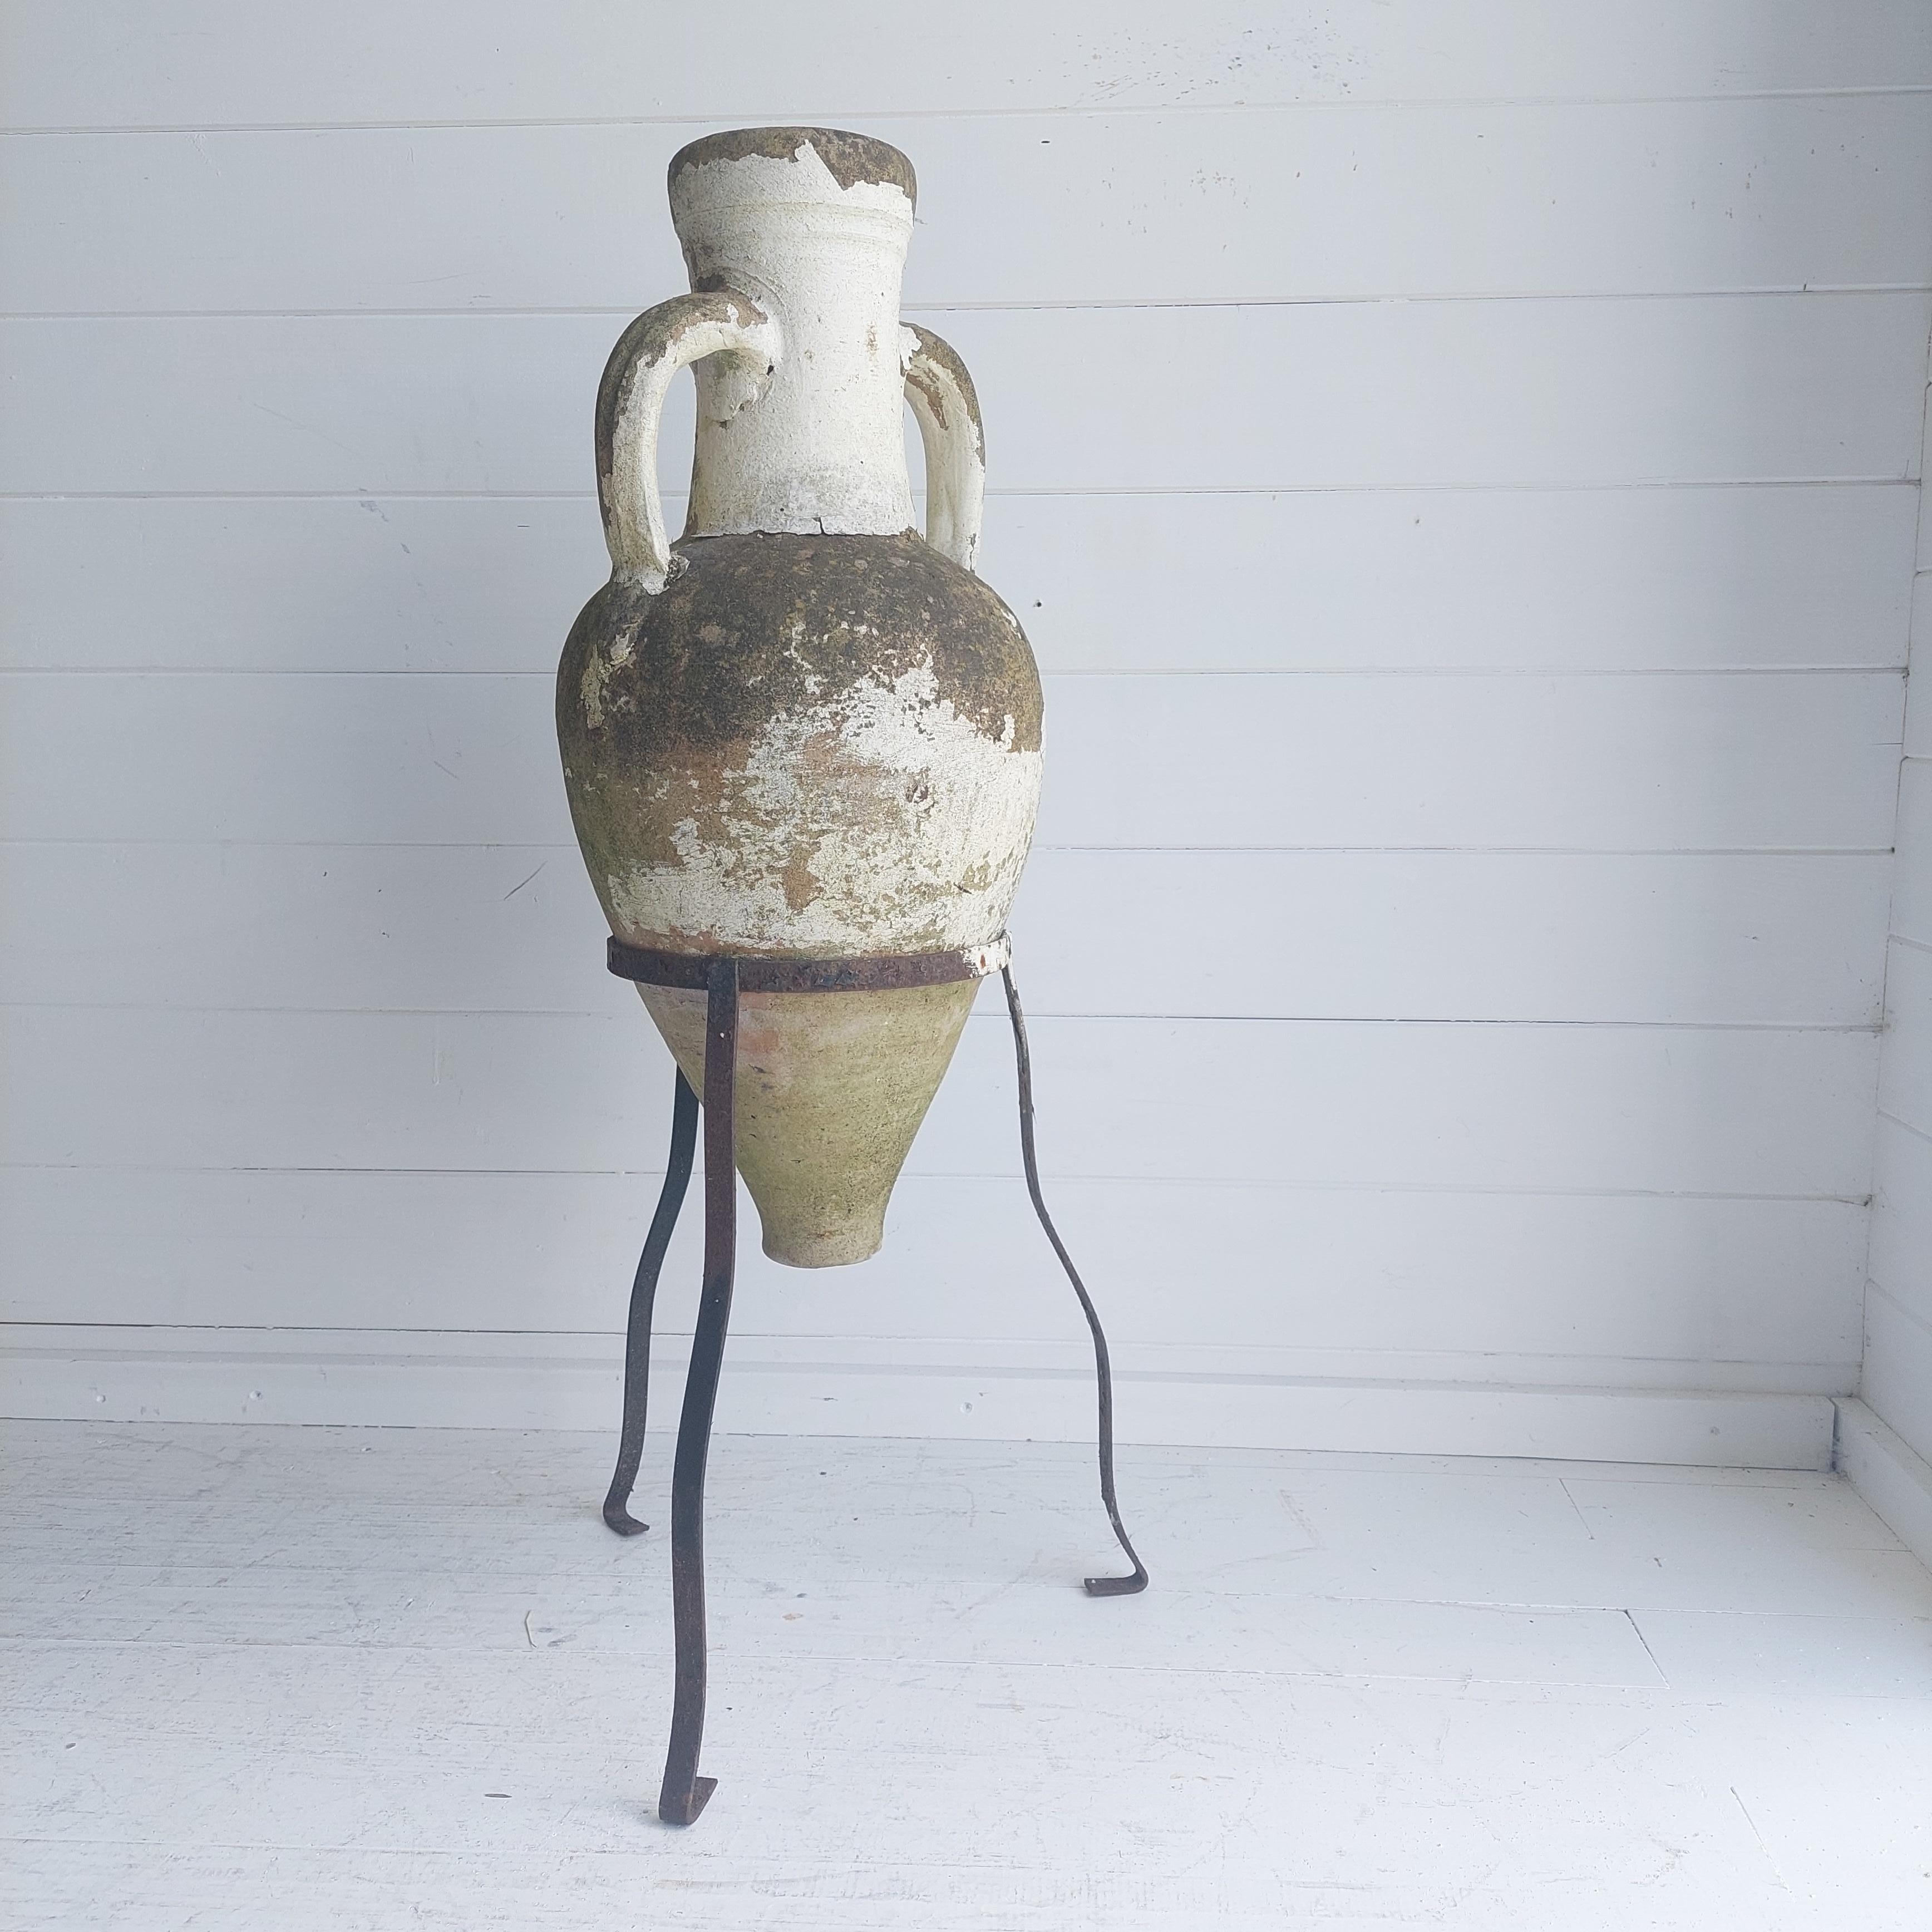 Vintage Antique Terracotta Amphora with Wrought Iron Tripod Stand, 1800s For Sale 5